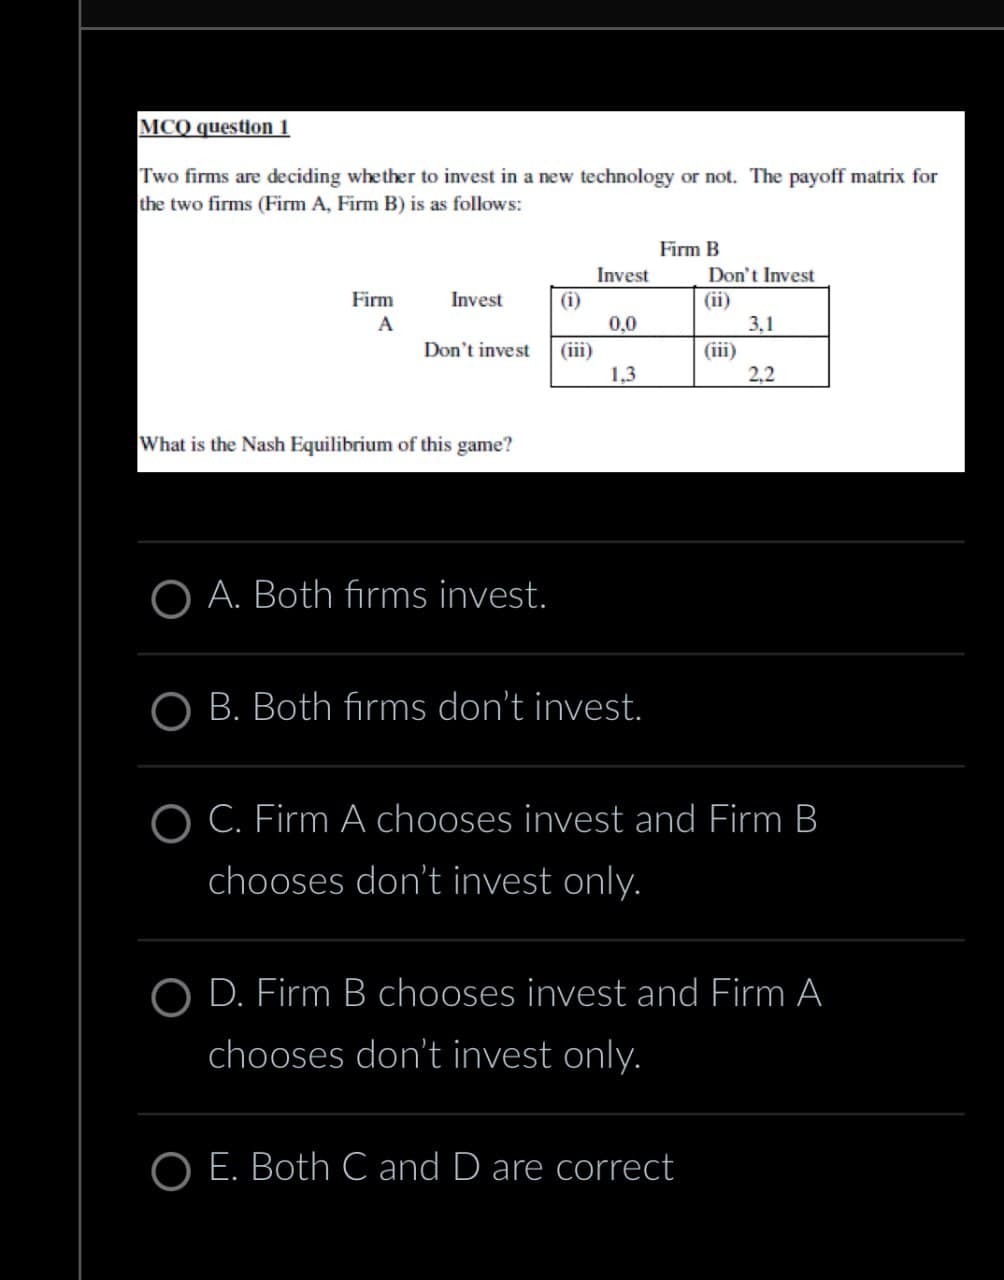 MCQ question 1
Two firms are deciding whether to invest in a new technology or not. The payoff matrix for
the two firms (Firm A, Firm B) is as follows:
Firm B
Invest
Don't Invest
Firm
A
Invest
(i)
(ii)
0,0
3,1
Don't invest
(iii)
(iii)
1.3
2,2
What is the Nash Equilibrium of this game?
OA. Both firms invest.
OB. Both firms don't invest.
C. Firm A chooses invest and Firm B
chooses don't invest only.
OD. Firm B chooses invest and Firm A
chooses don't invest only.
O E. Both C and D are correct